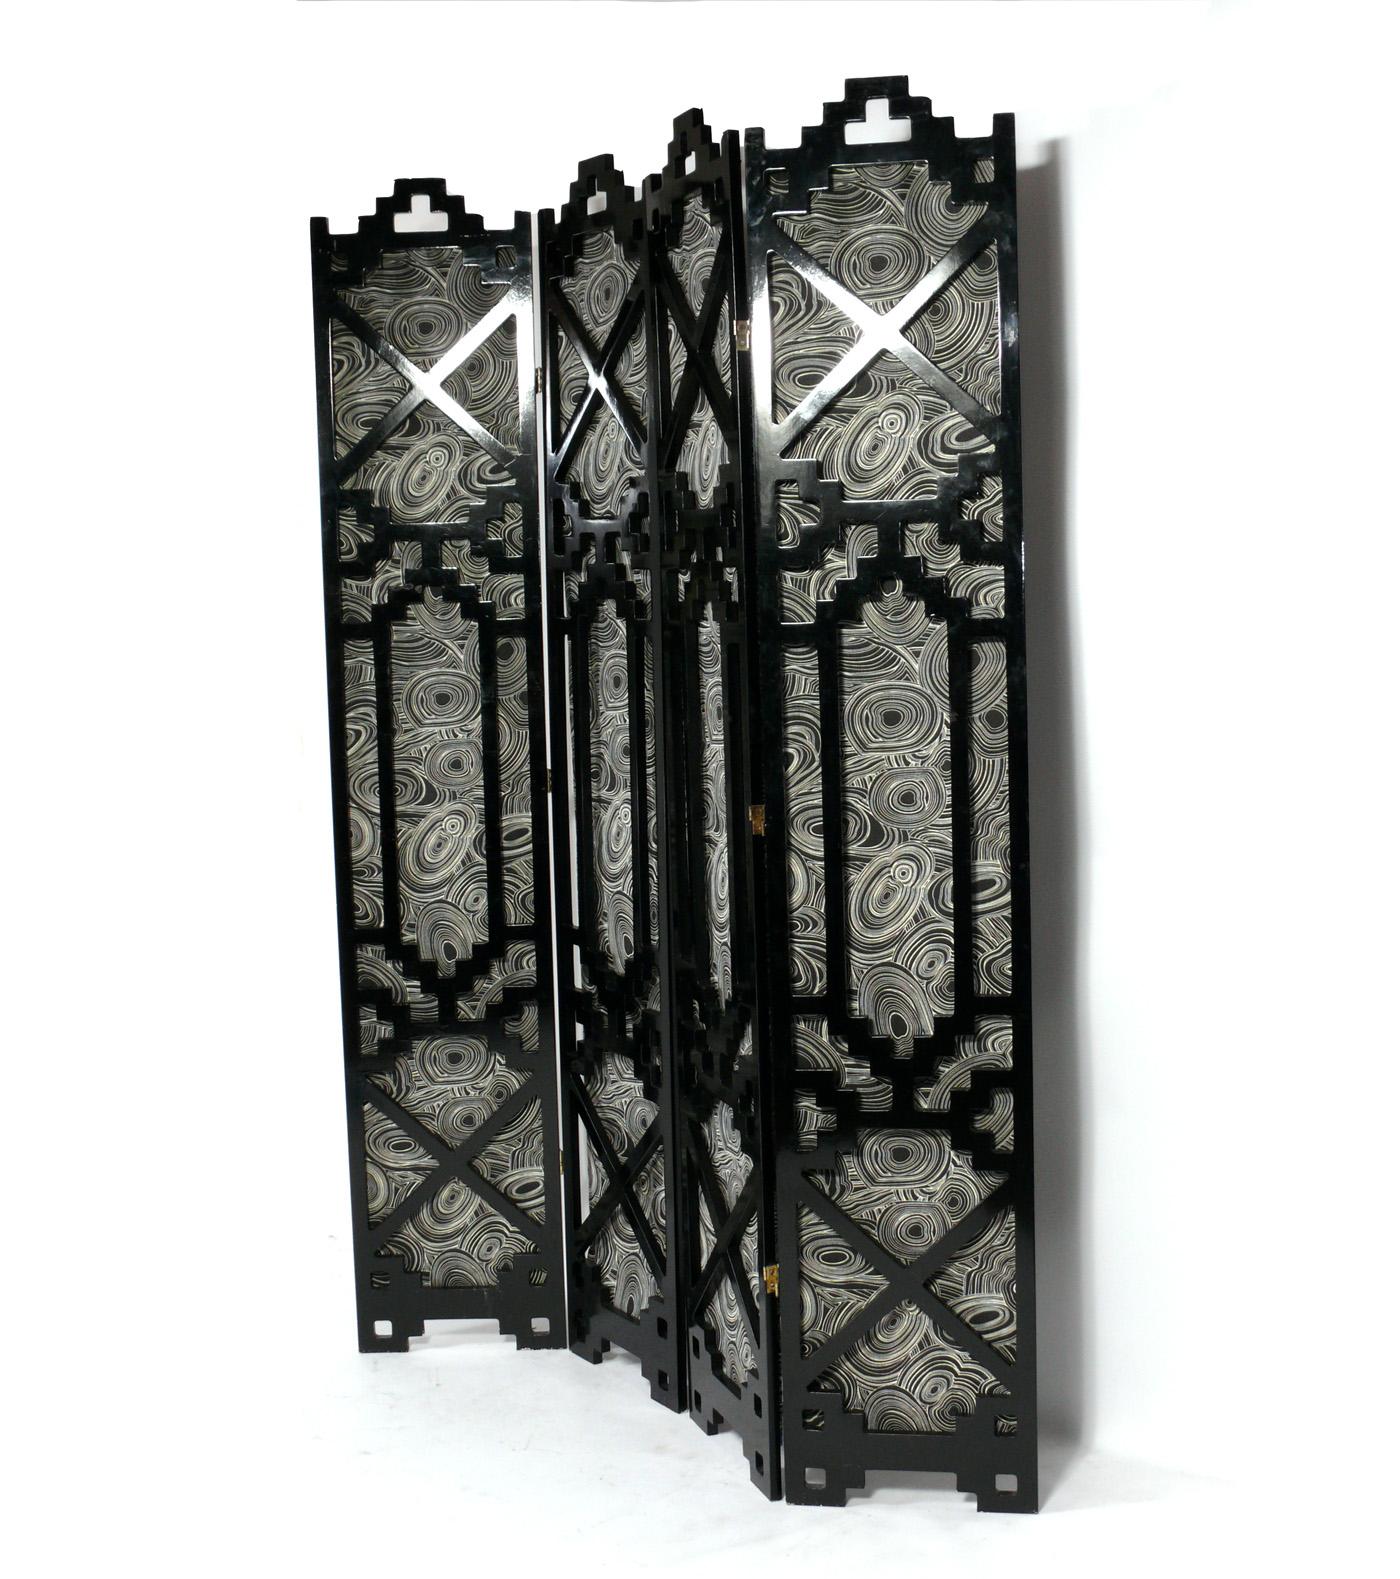 Asian black lacquer folding screen or room divider, probably Chinese, circa 1960s. It has been recently reupholstered in a black and white color malachite print fabric. It is a versatile size and can be used as a folding screen, room divider, or